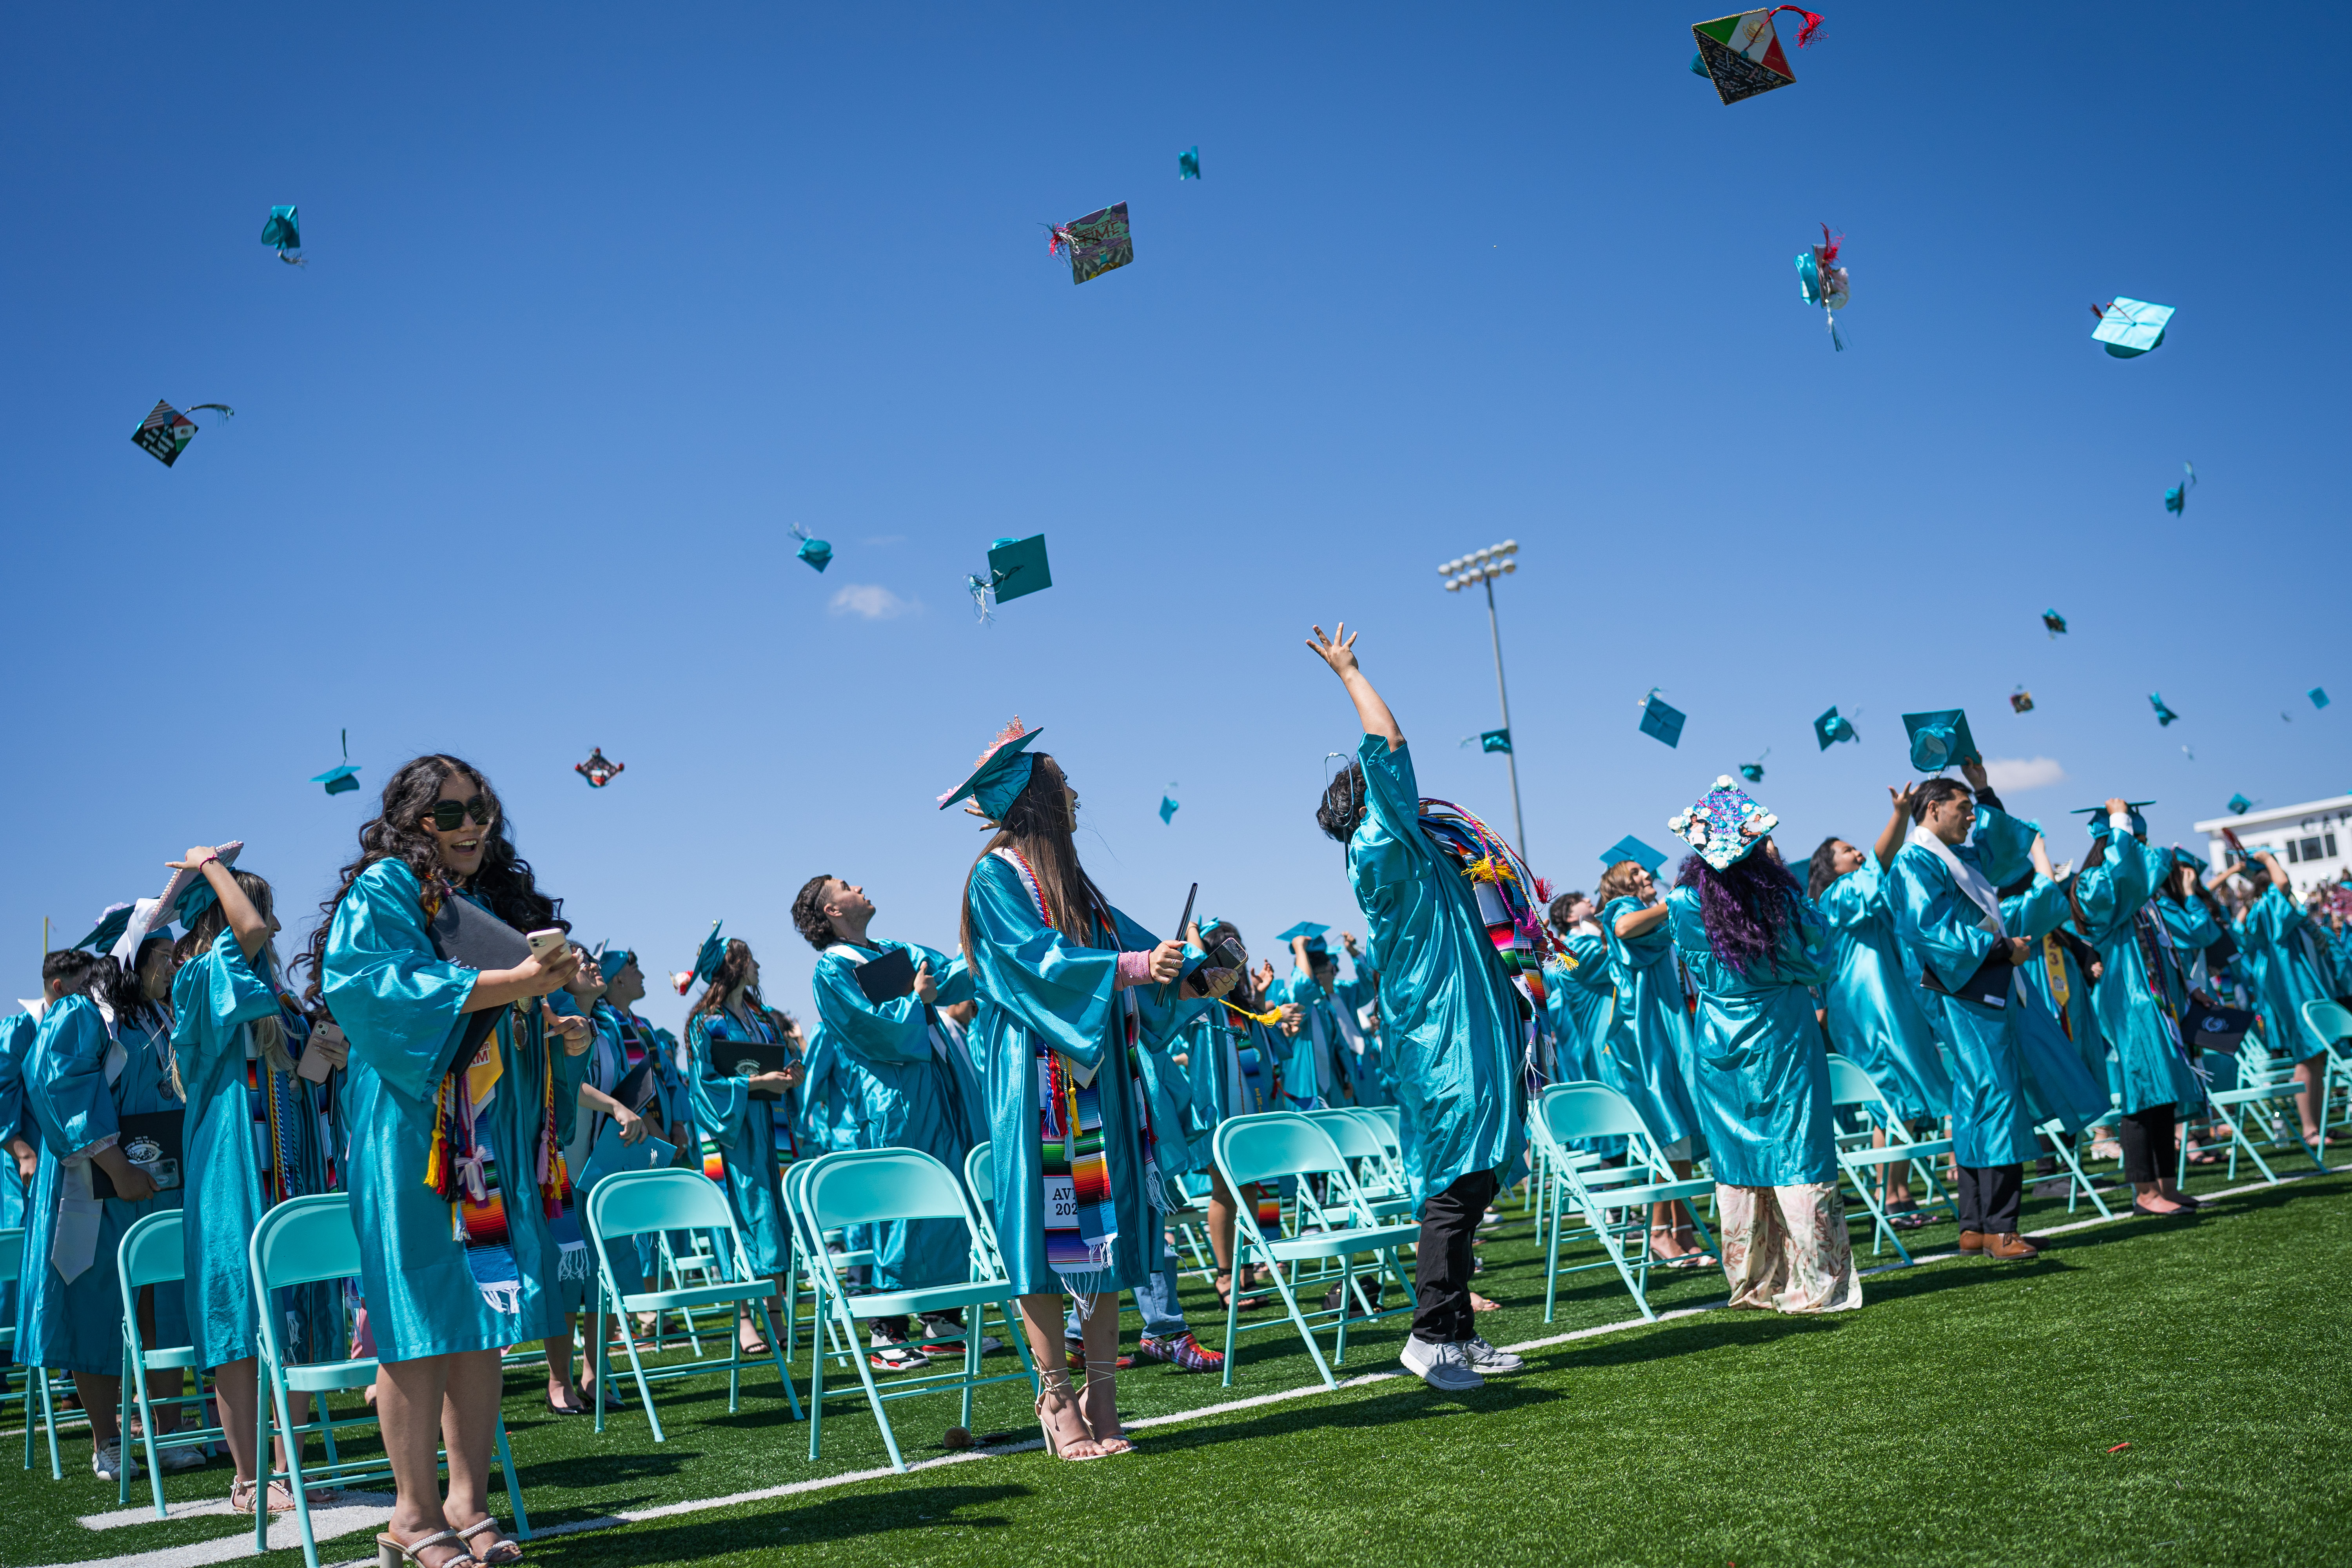 students throwing their graduation cap in the air